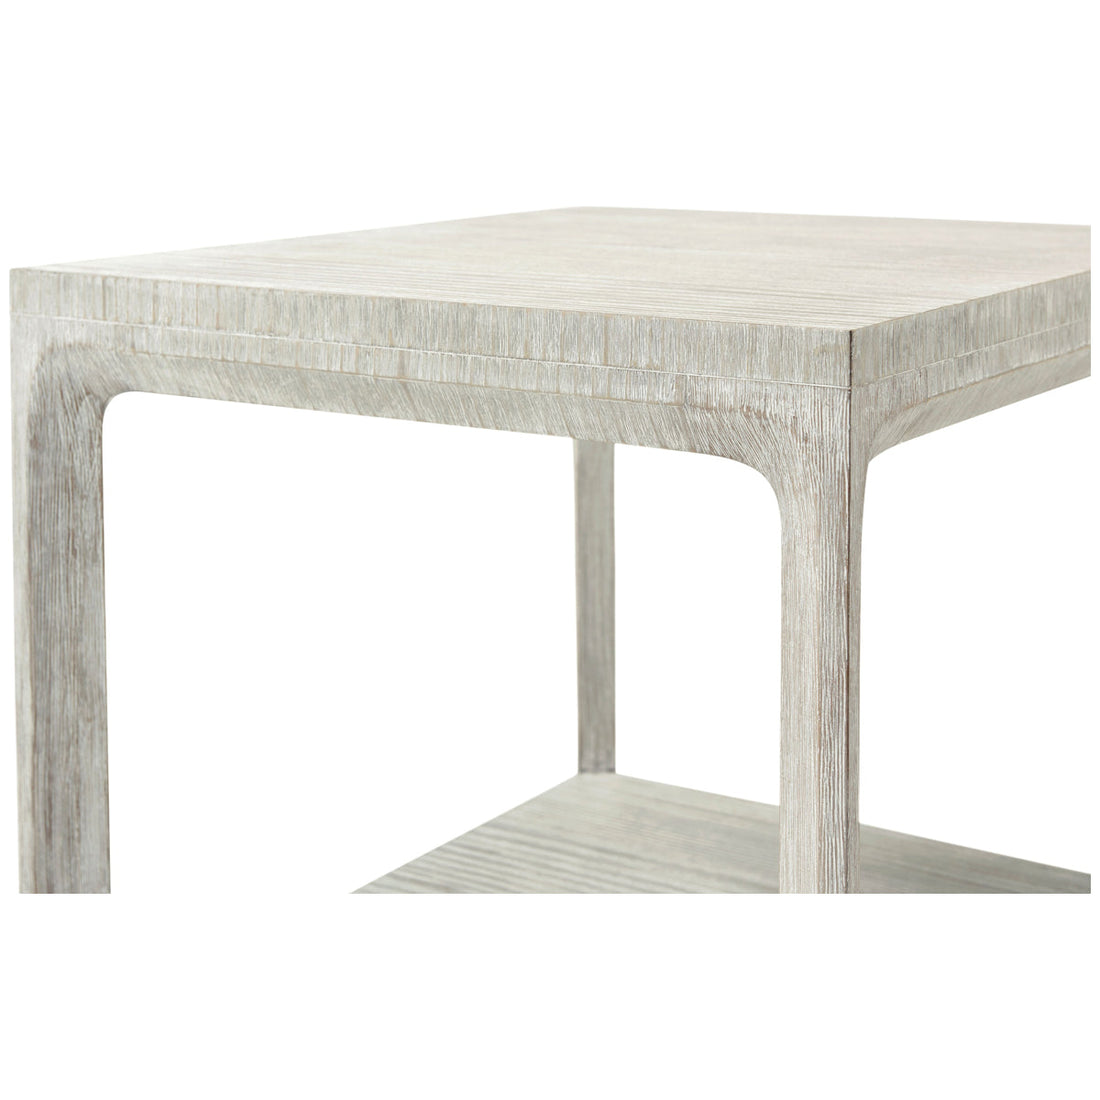 Theodore Alexander Breeze Side Table